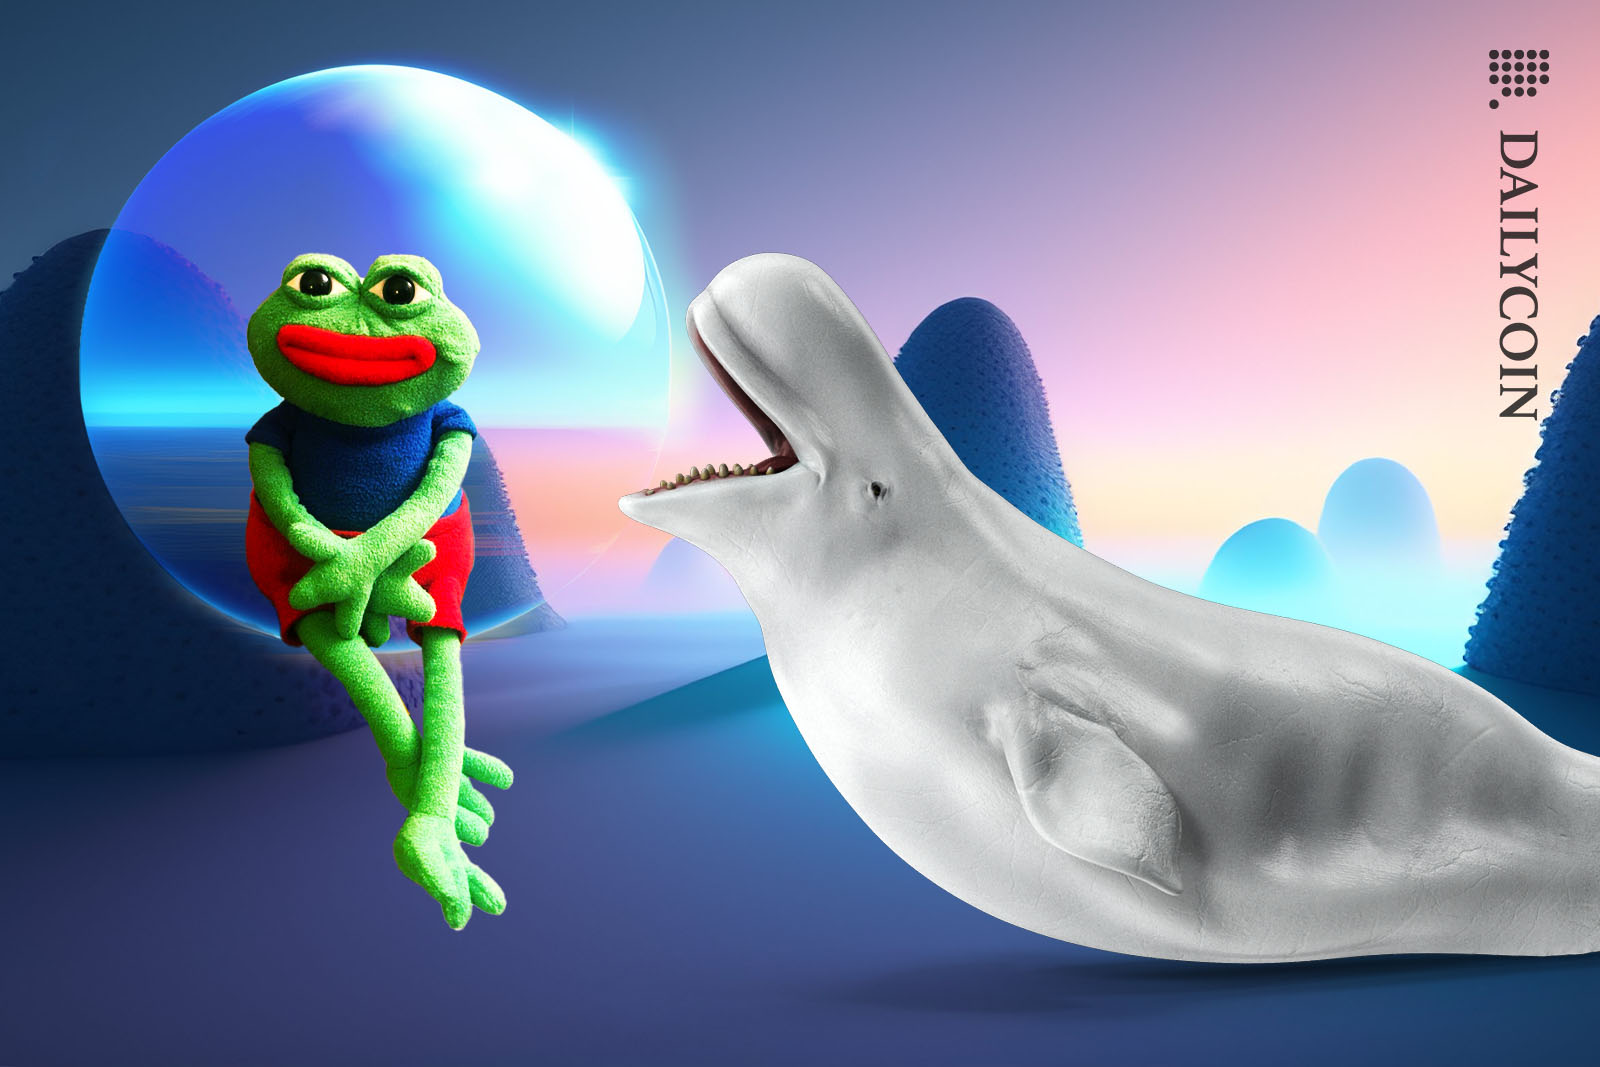 Pepe sitting happy in Beluga whales bubble.